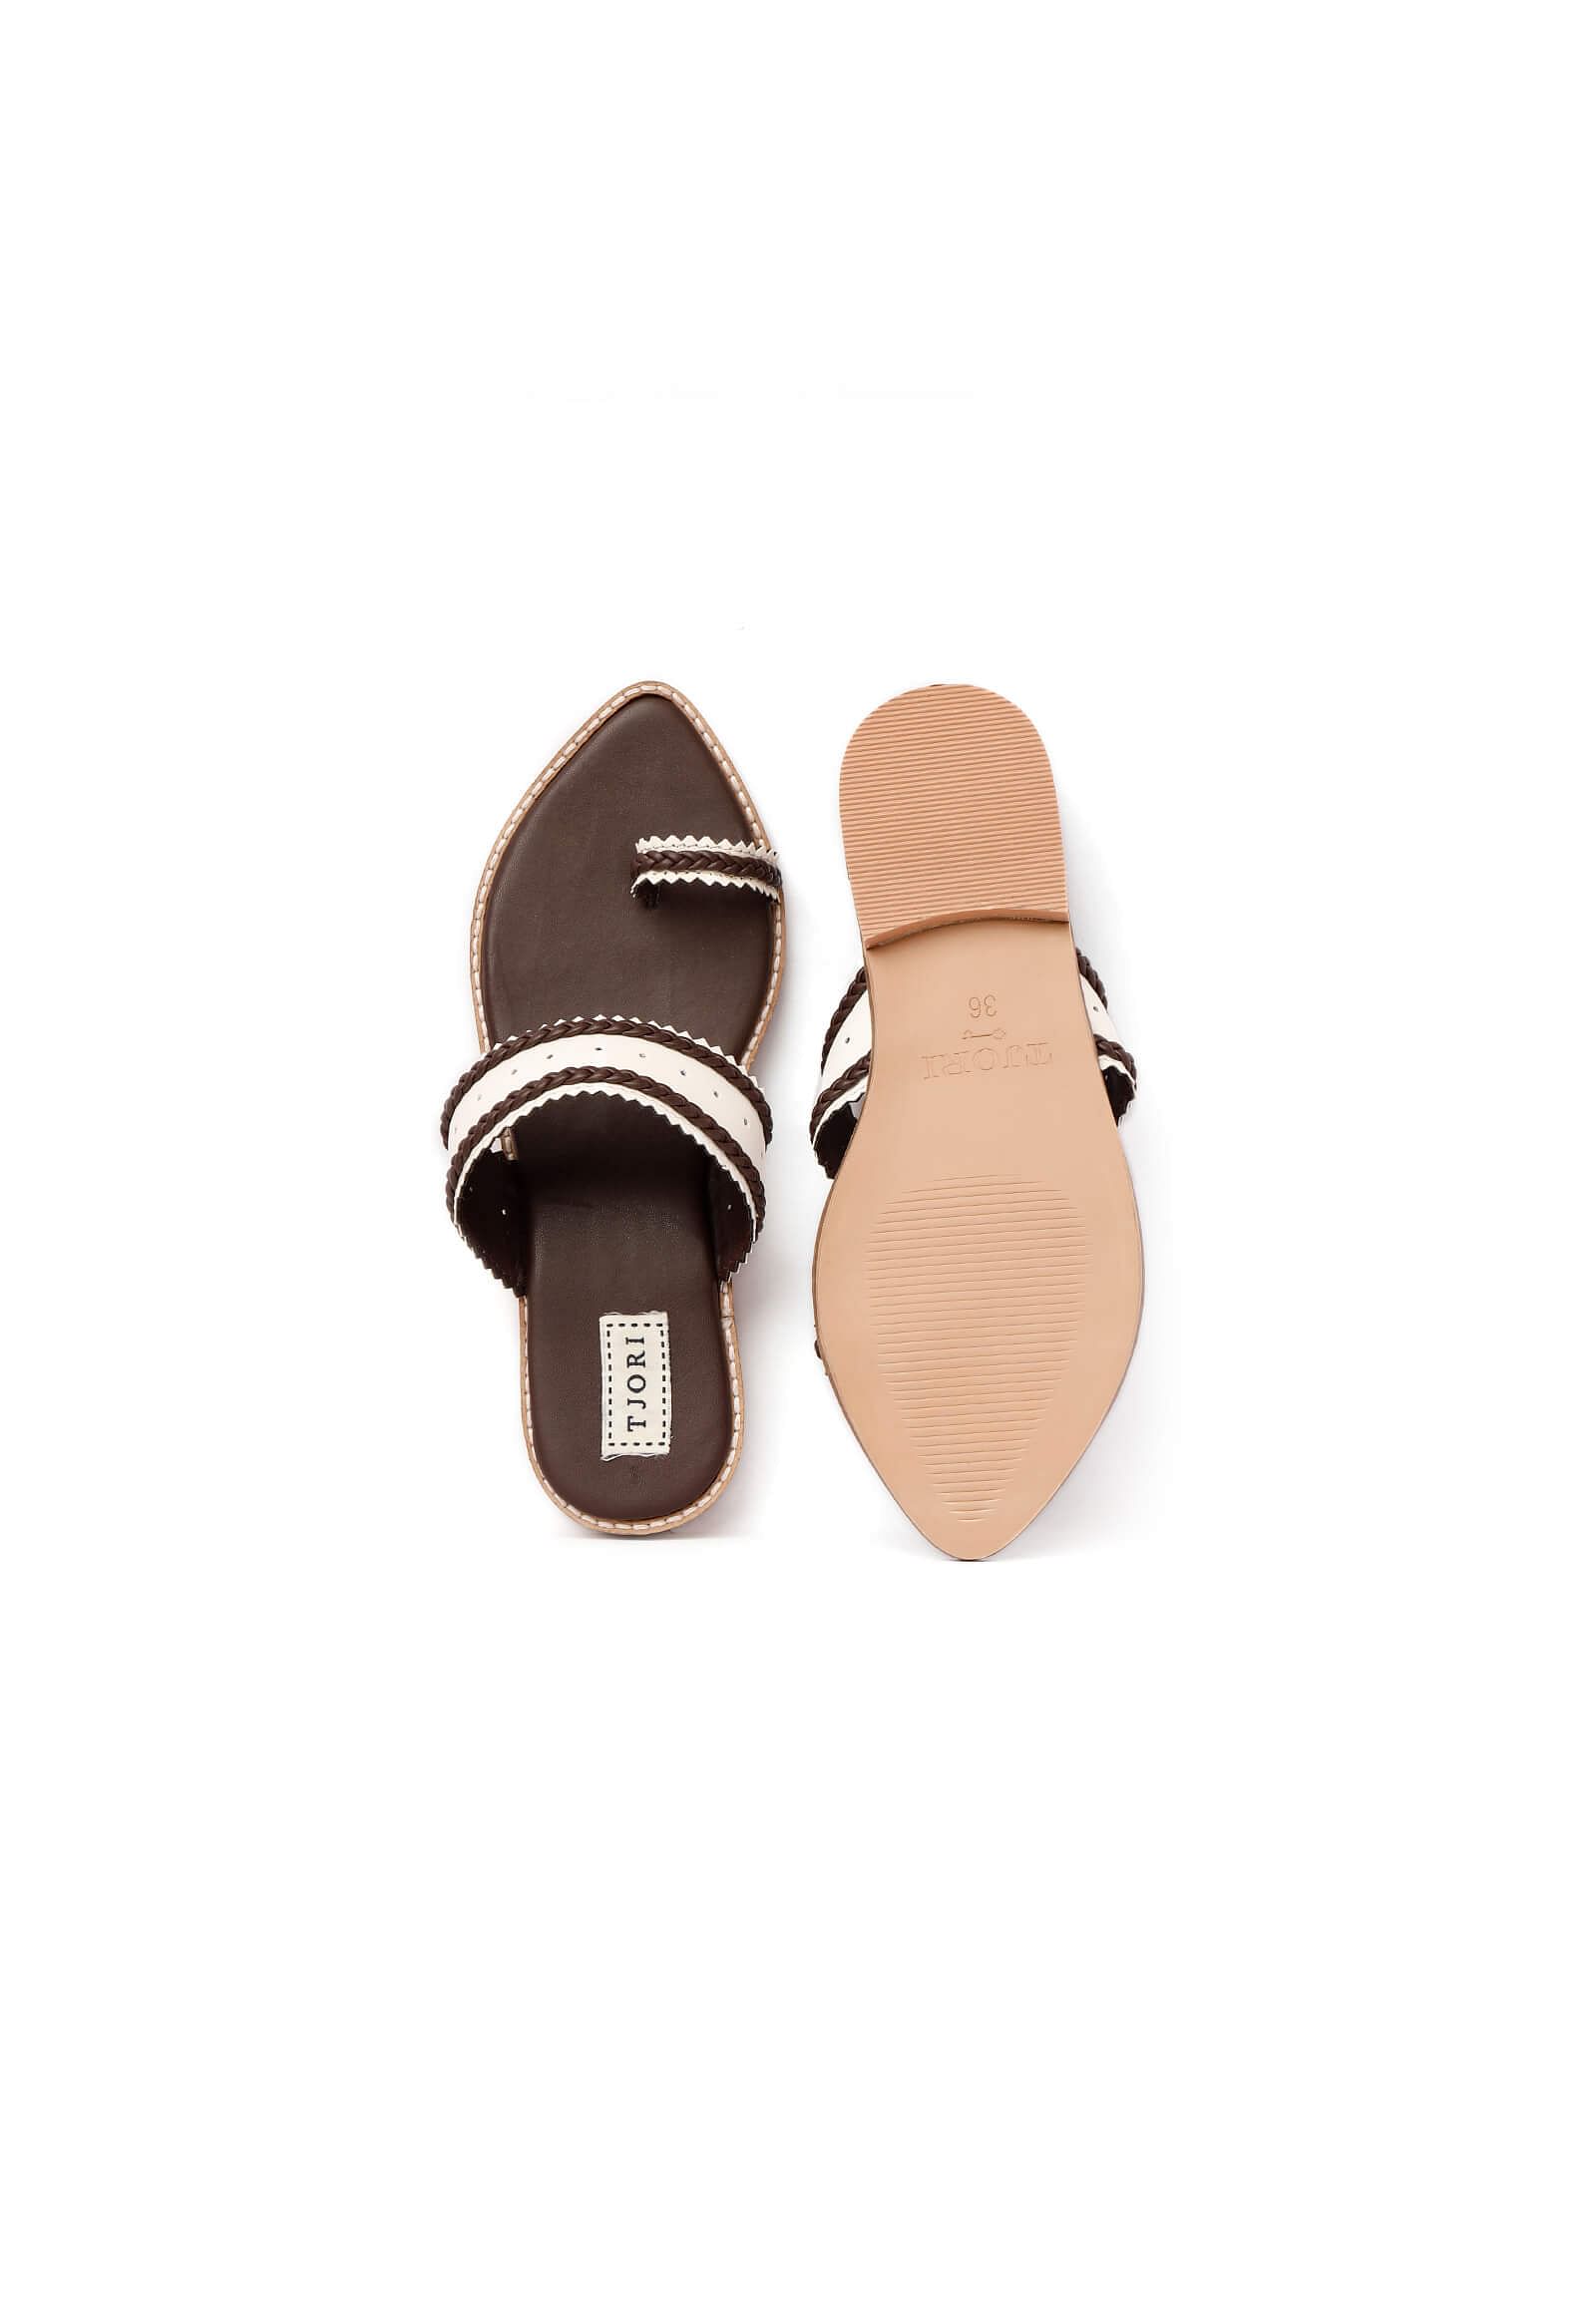 White & Brown Cruelty-Free Leather Sandals